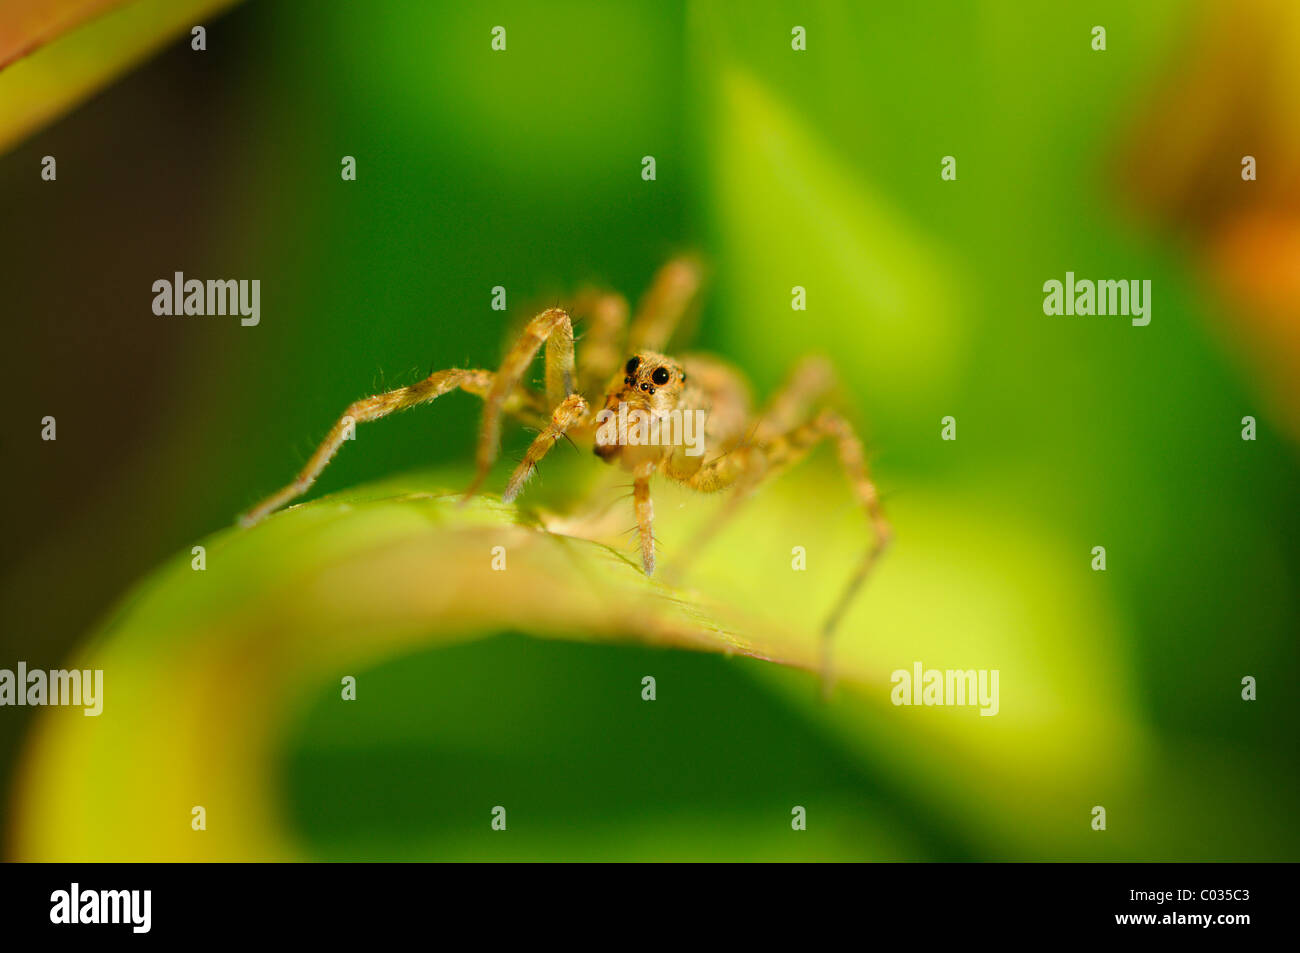 Micro view of a spider on a leaf Stock Photo